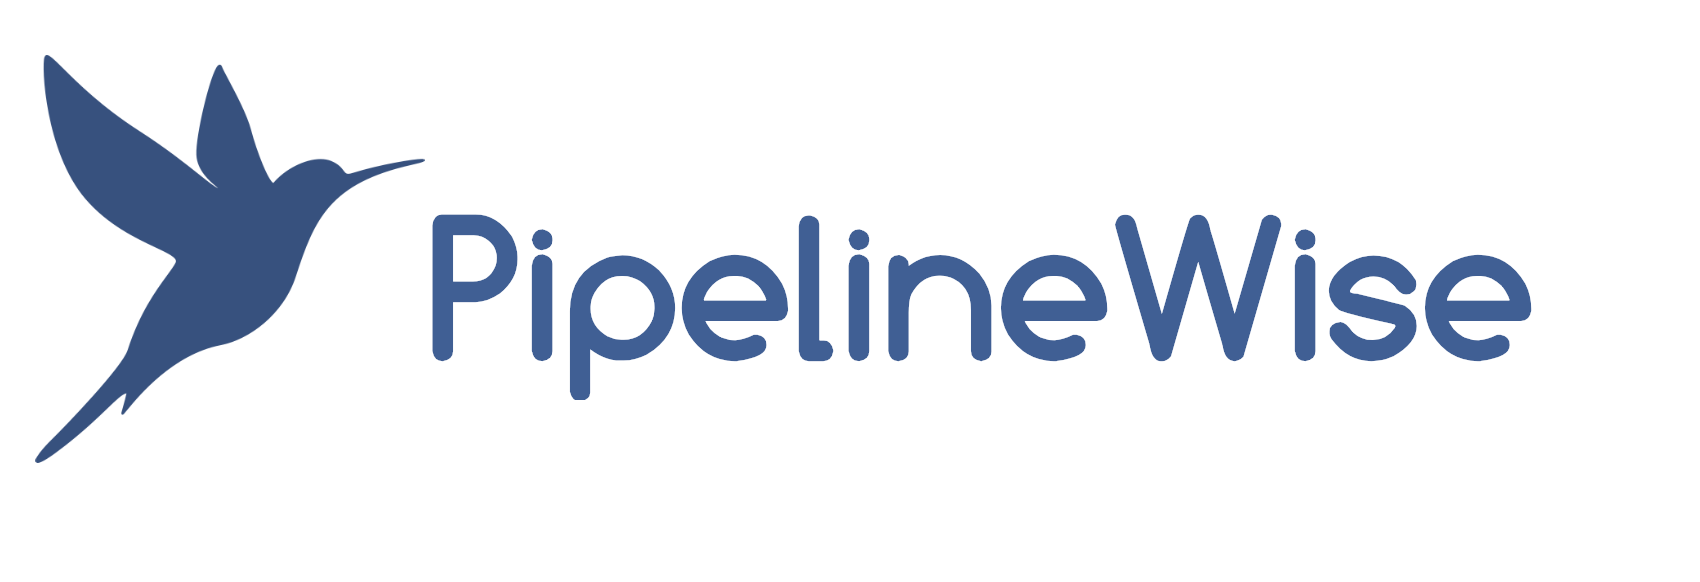 _images/pipelinewise-with-text.png